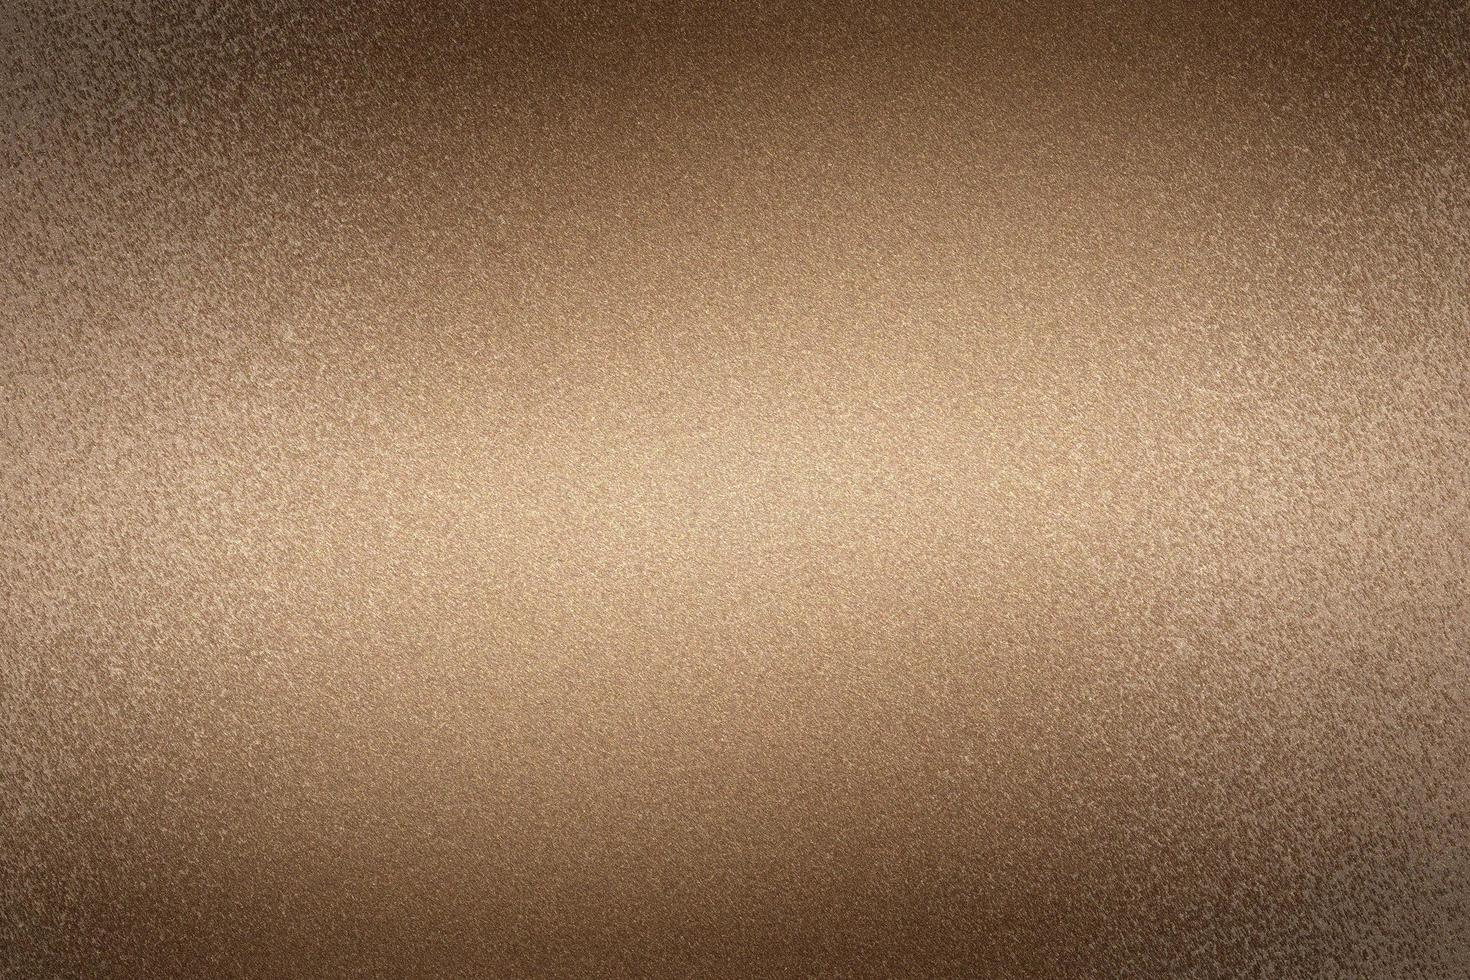 Brushed bronze metal wall, abstract texture background photo